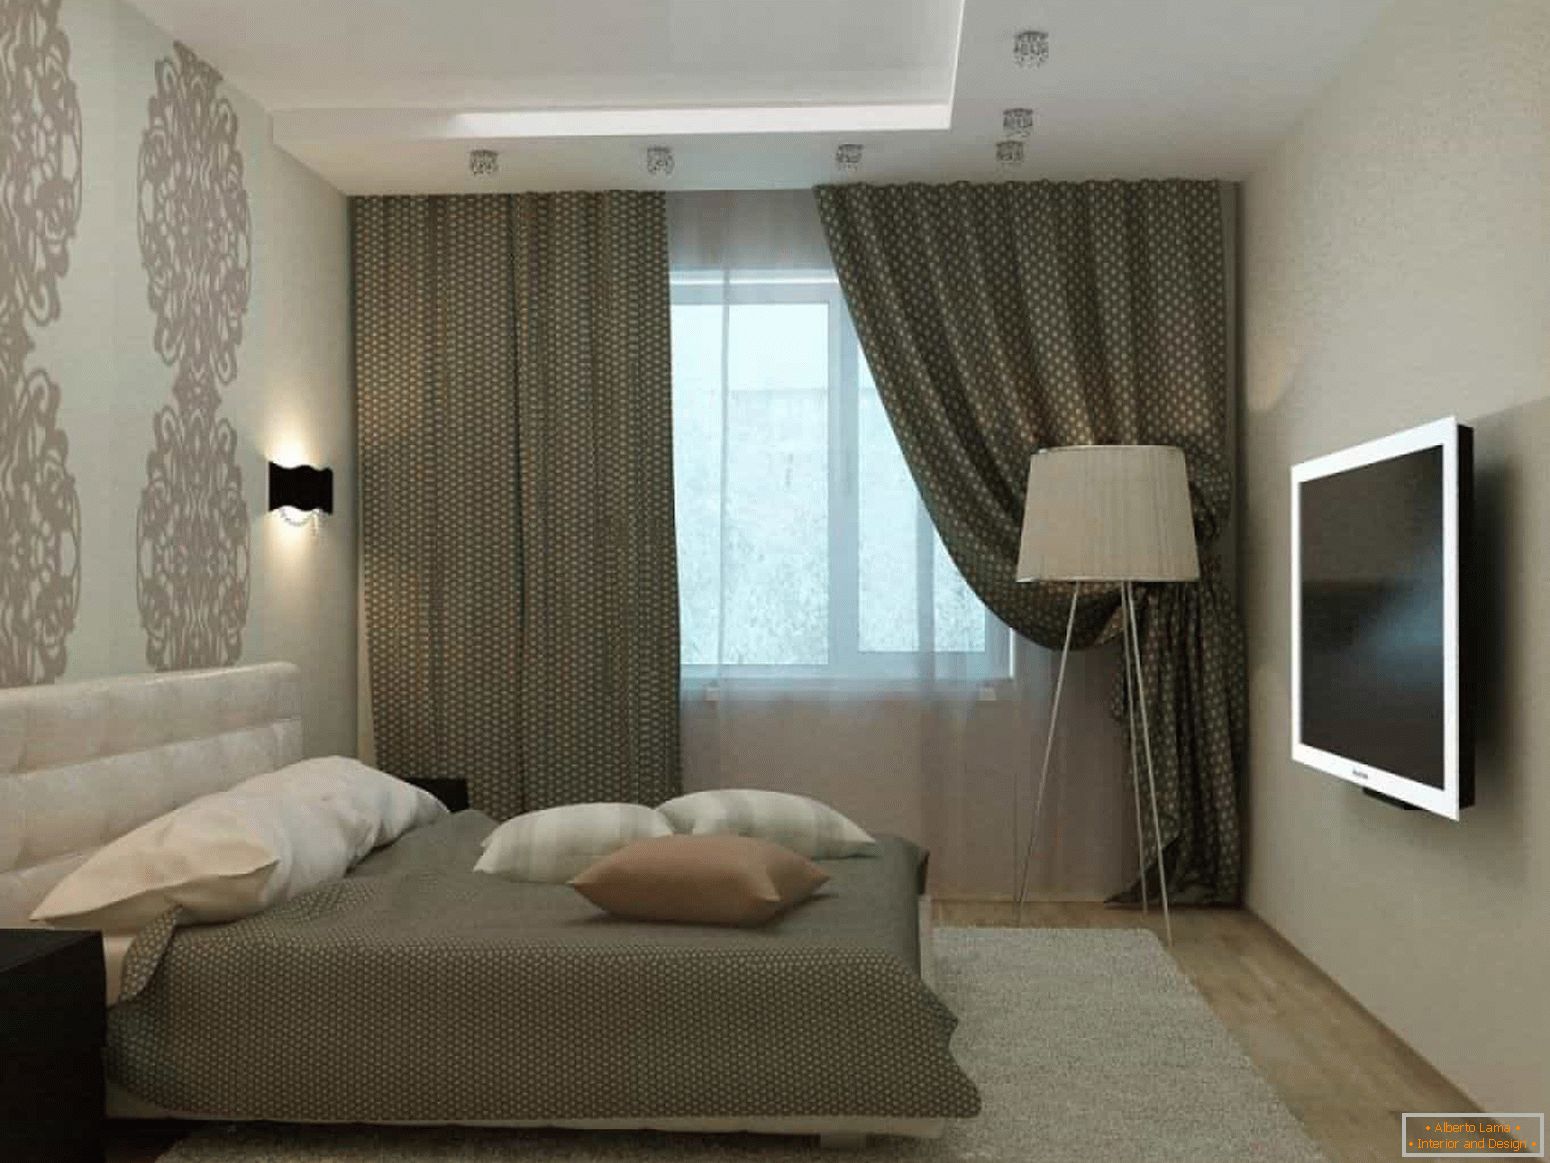 Spot lights on the ceiling and sconces on the wall in the bedroom